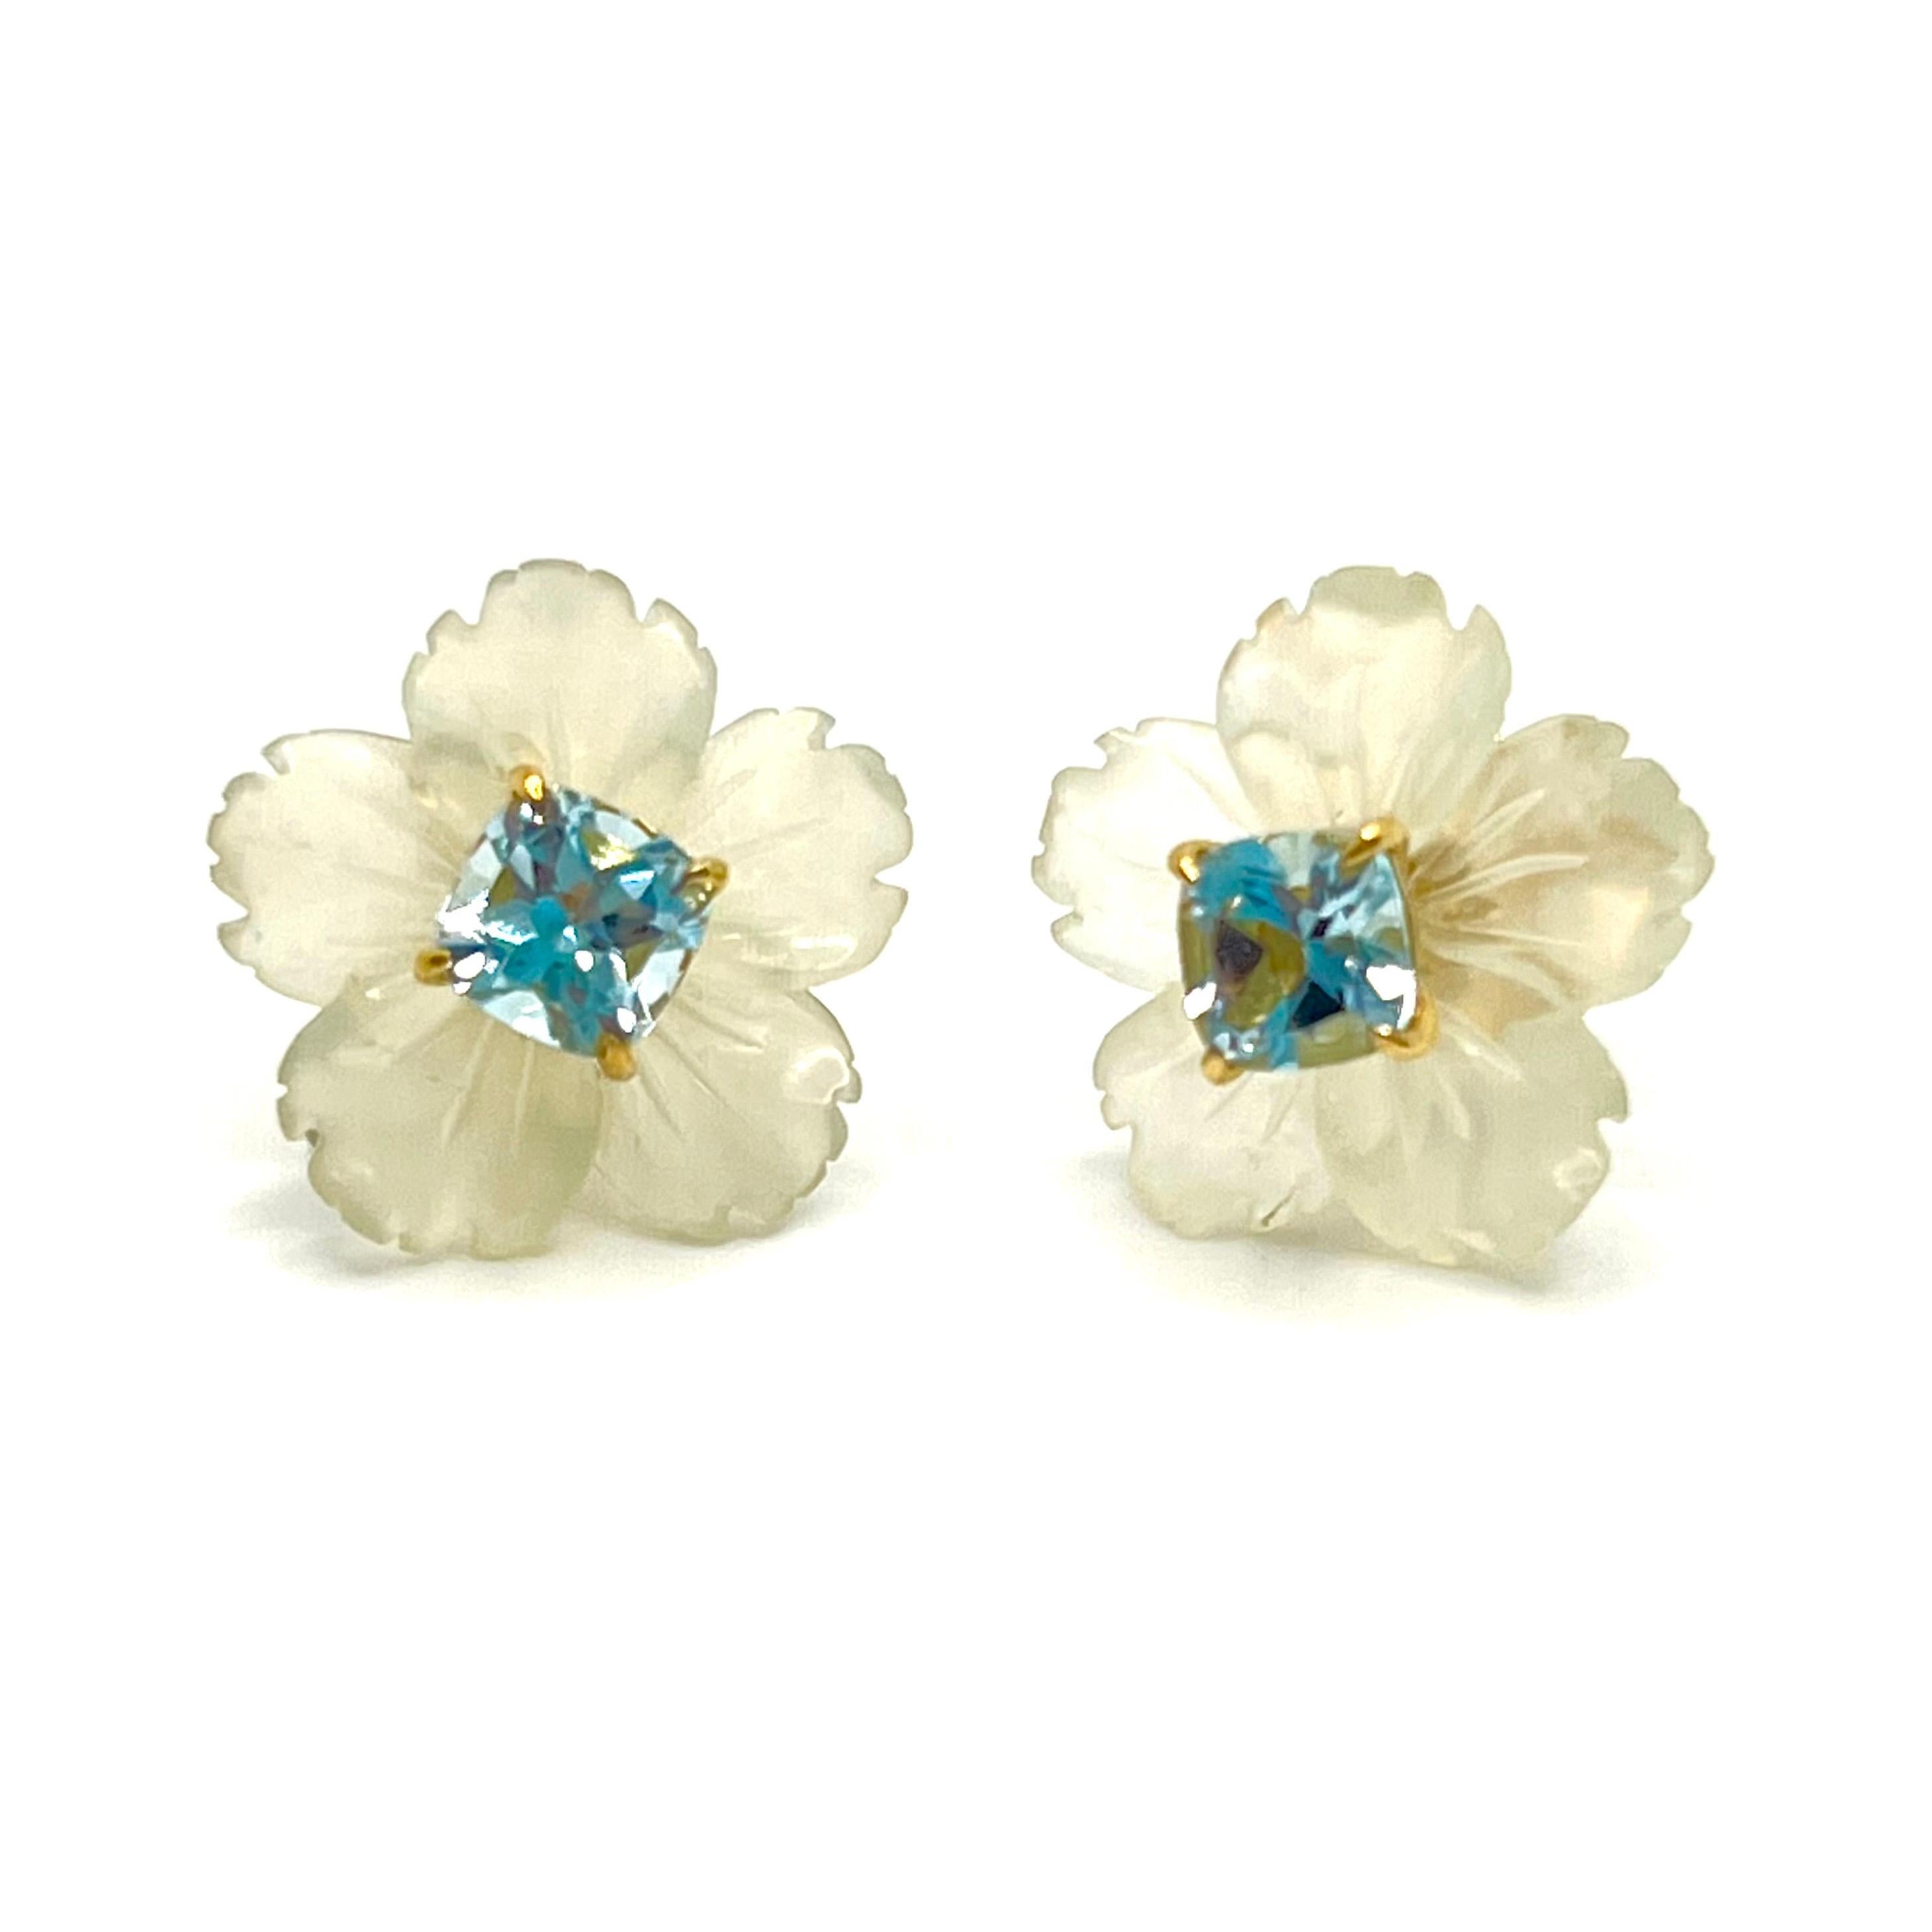 Bijoux Num's 18mm Carved Serpentine Flower and Cushion Blue Topaz Vermeil Earrings

This gorgeous pair of earrings features 18mm frosted pale green serpentine carved into beautiful three dimension flower, adorned with genuine cushion-cut sky blue